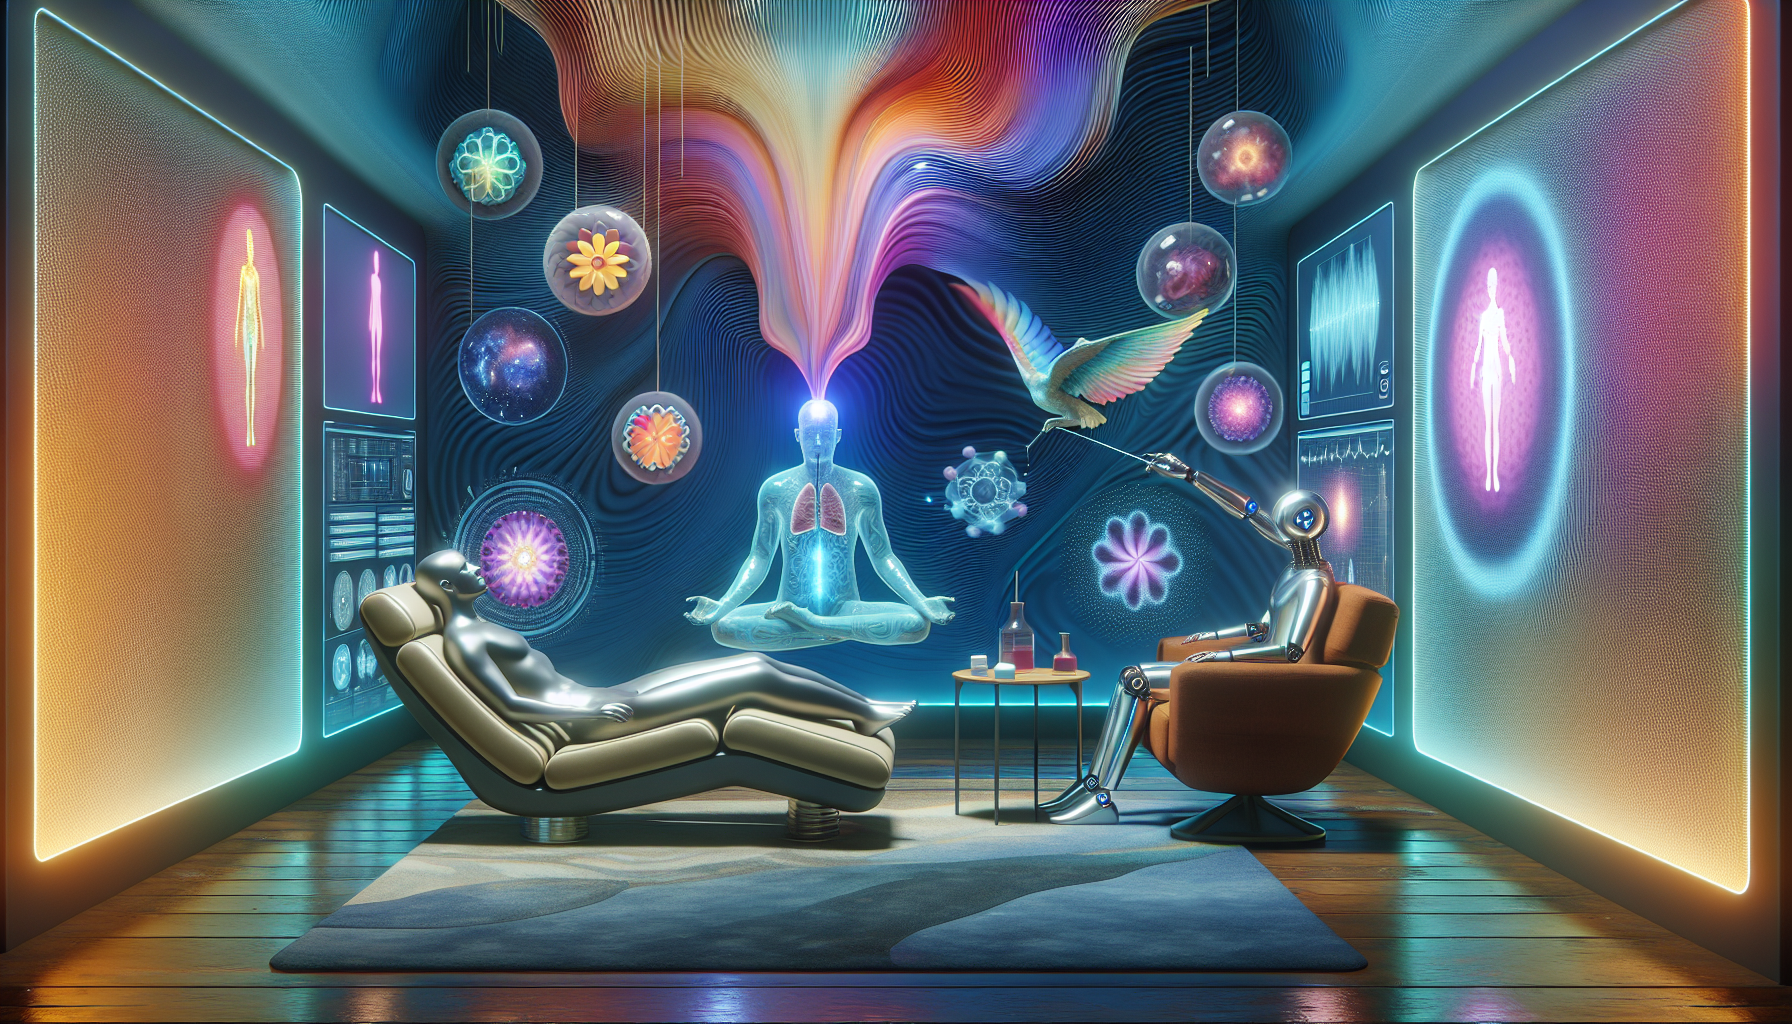 Illustration of the future of psychedelic medicine and therapy